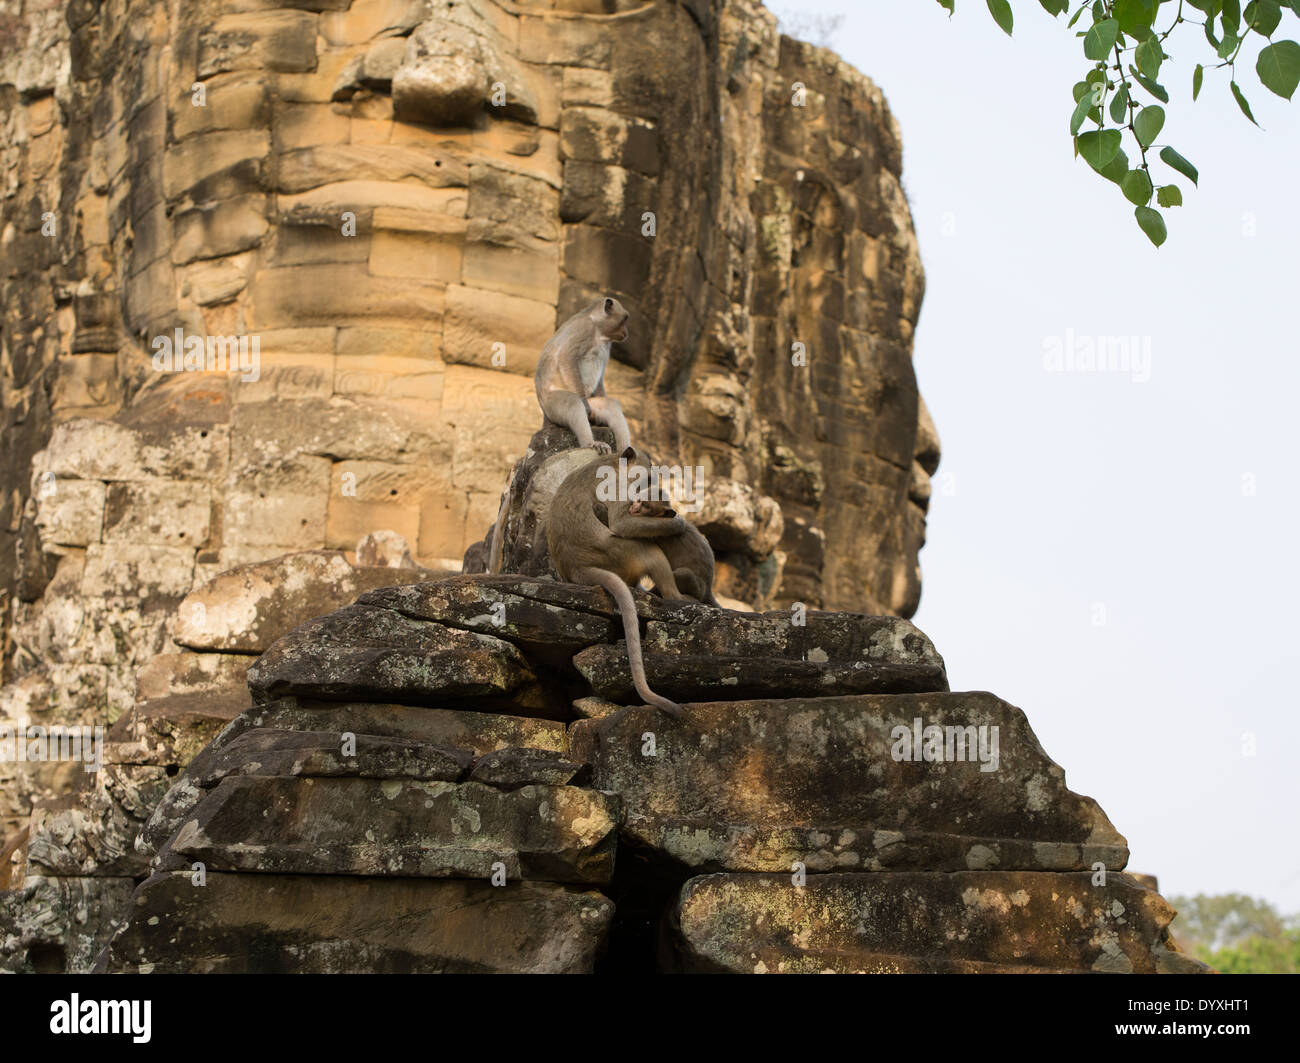 Macaque Monkeys at South Gate of Angkor Thom, Siem Reap, Cambodia Stock Photo